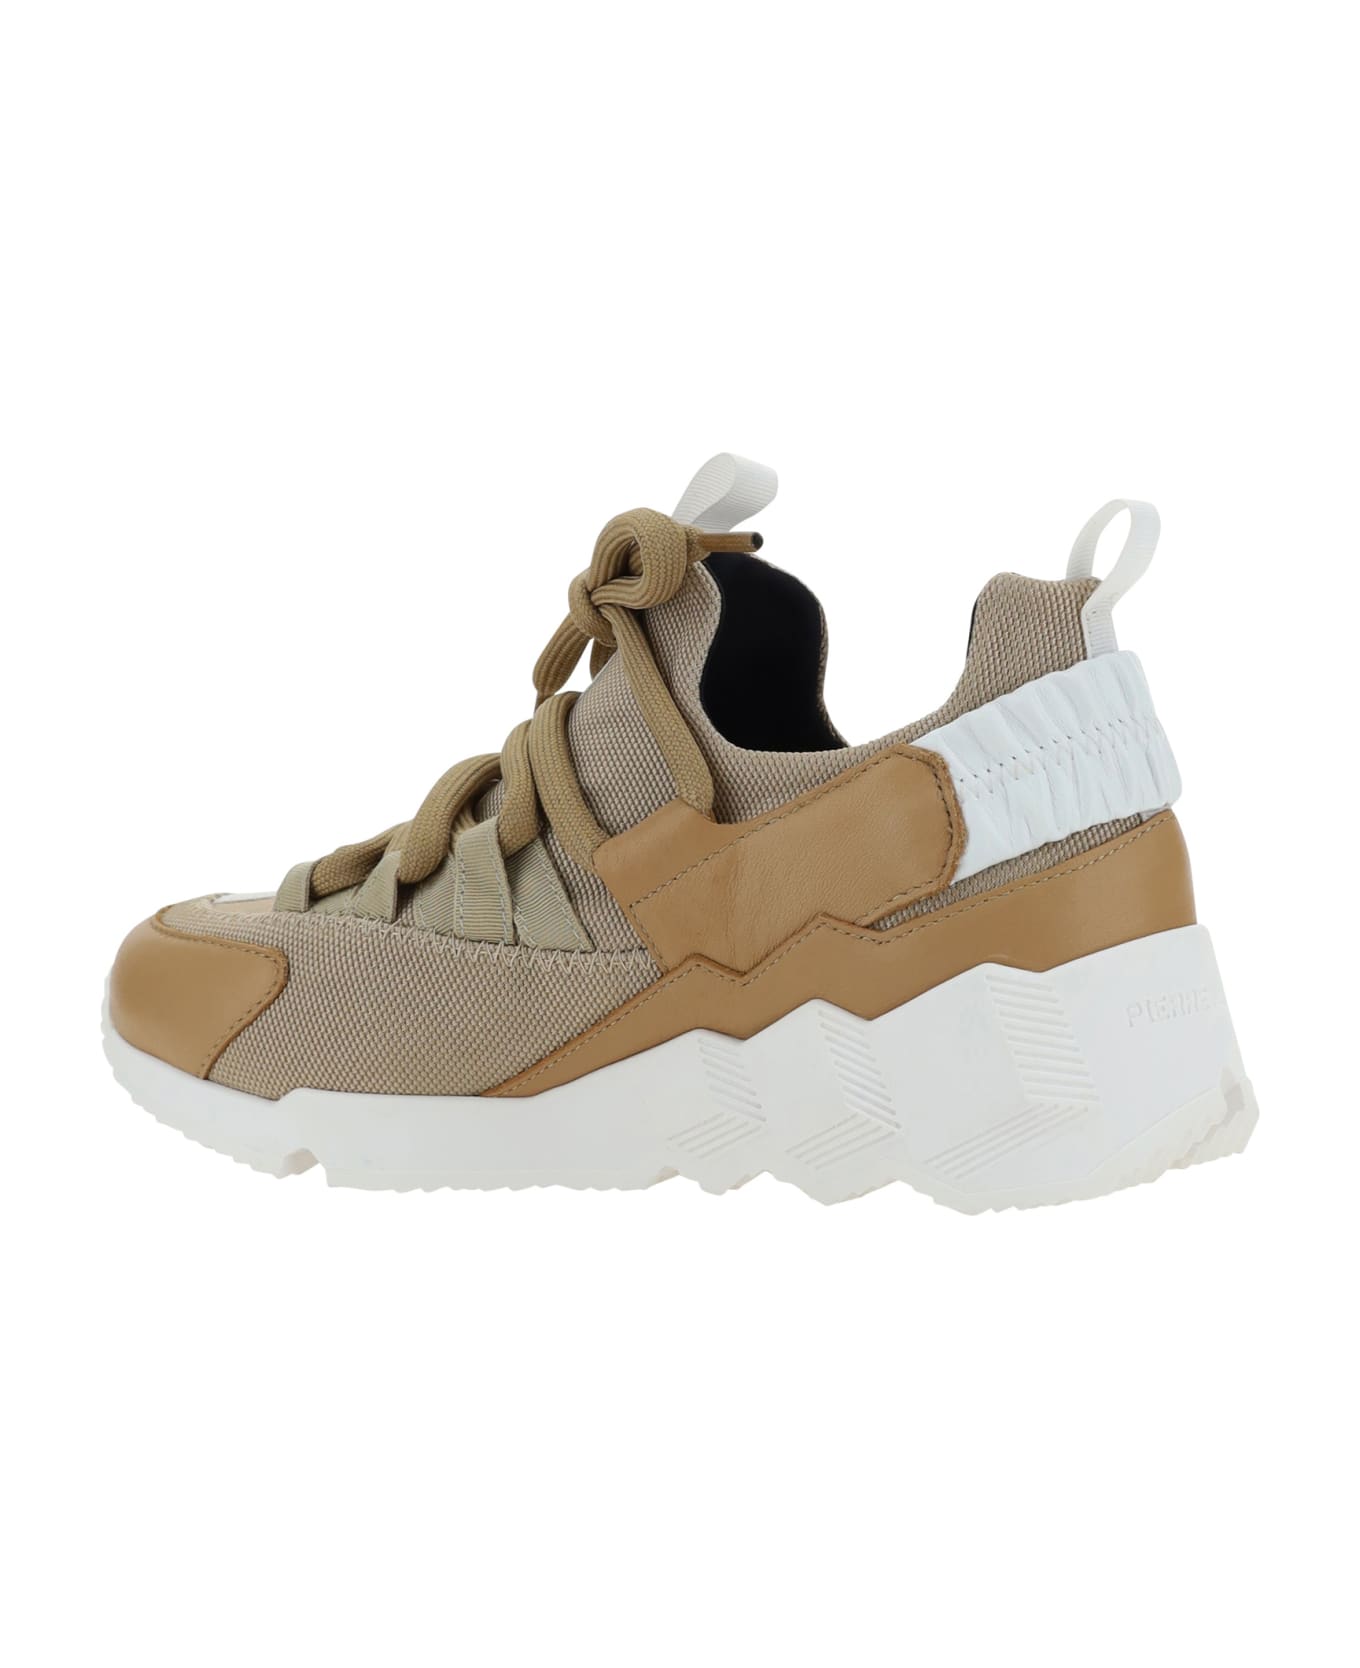 Pierre Hardy Trek Cosmetic Sneakers - Cappuccino/sand/white スニーカー